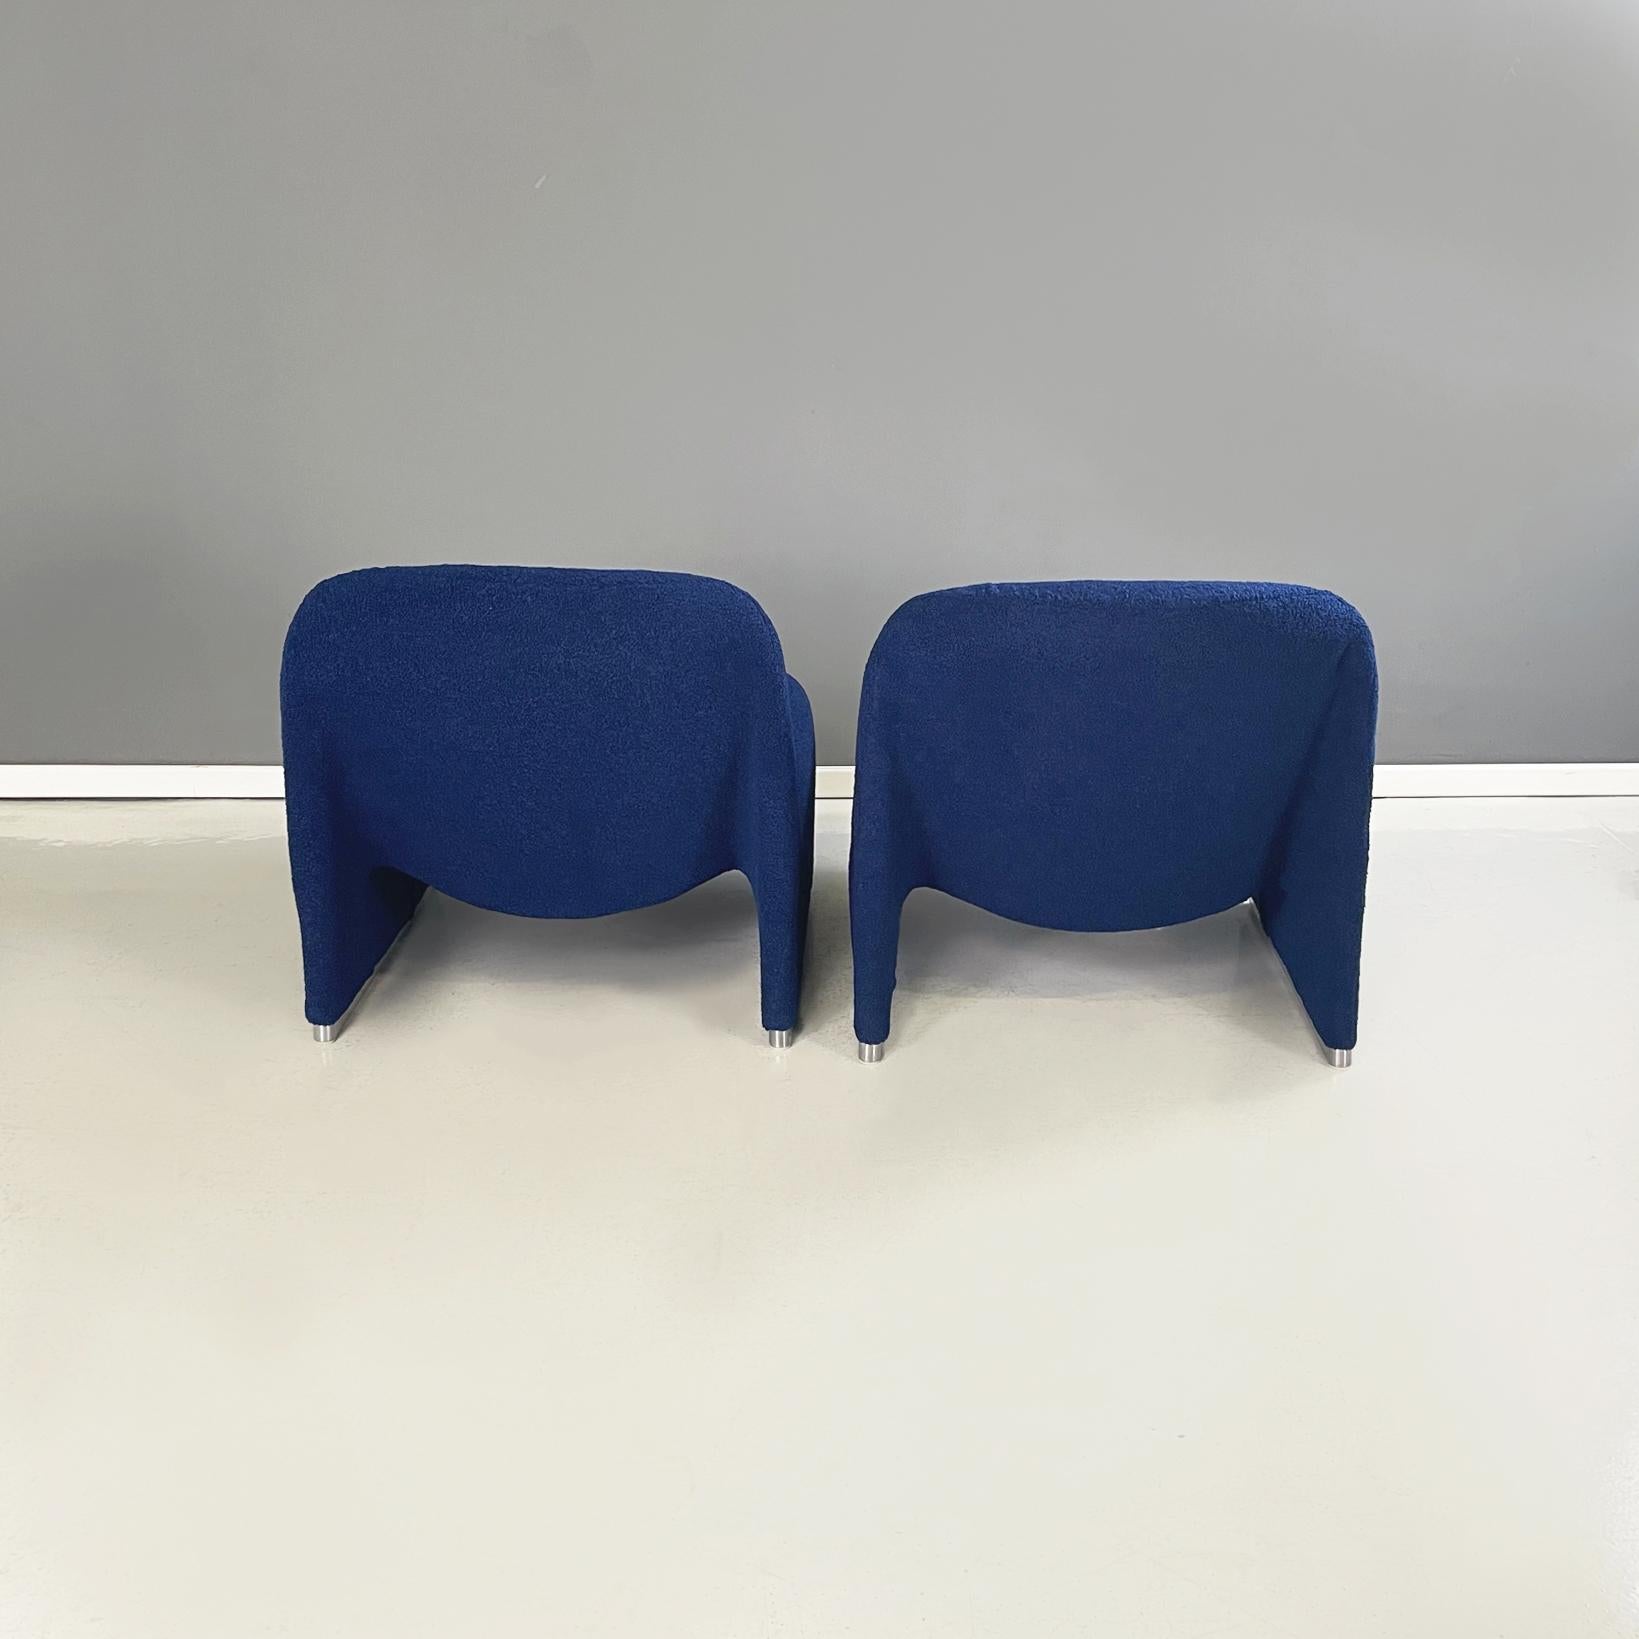 Late 20th Century Italian modern Blue fabric Armchairs Alky by Piretti for Anonima Castelli, 1970s For Sale